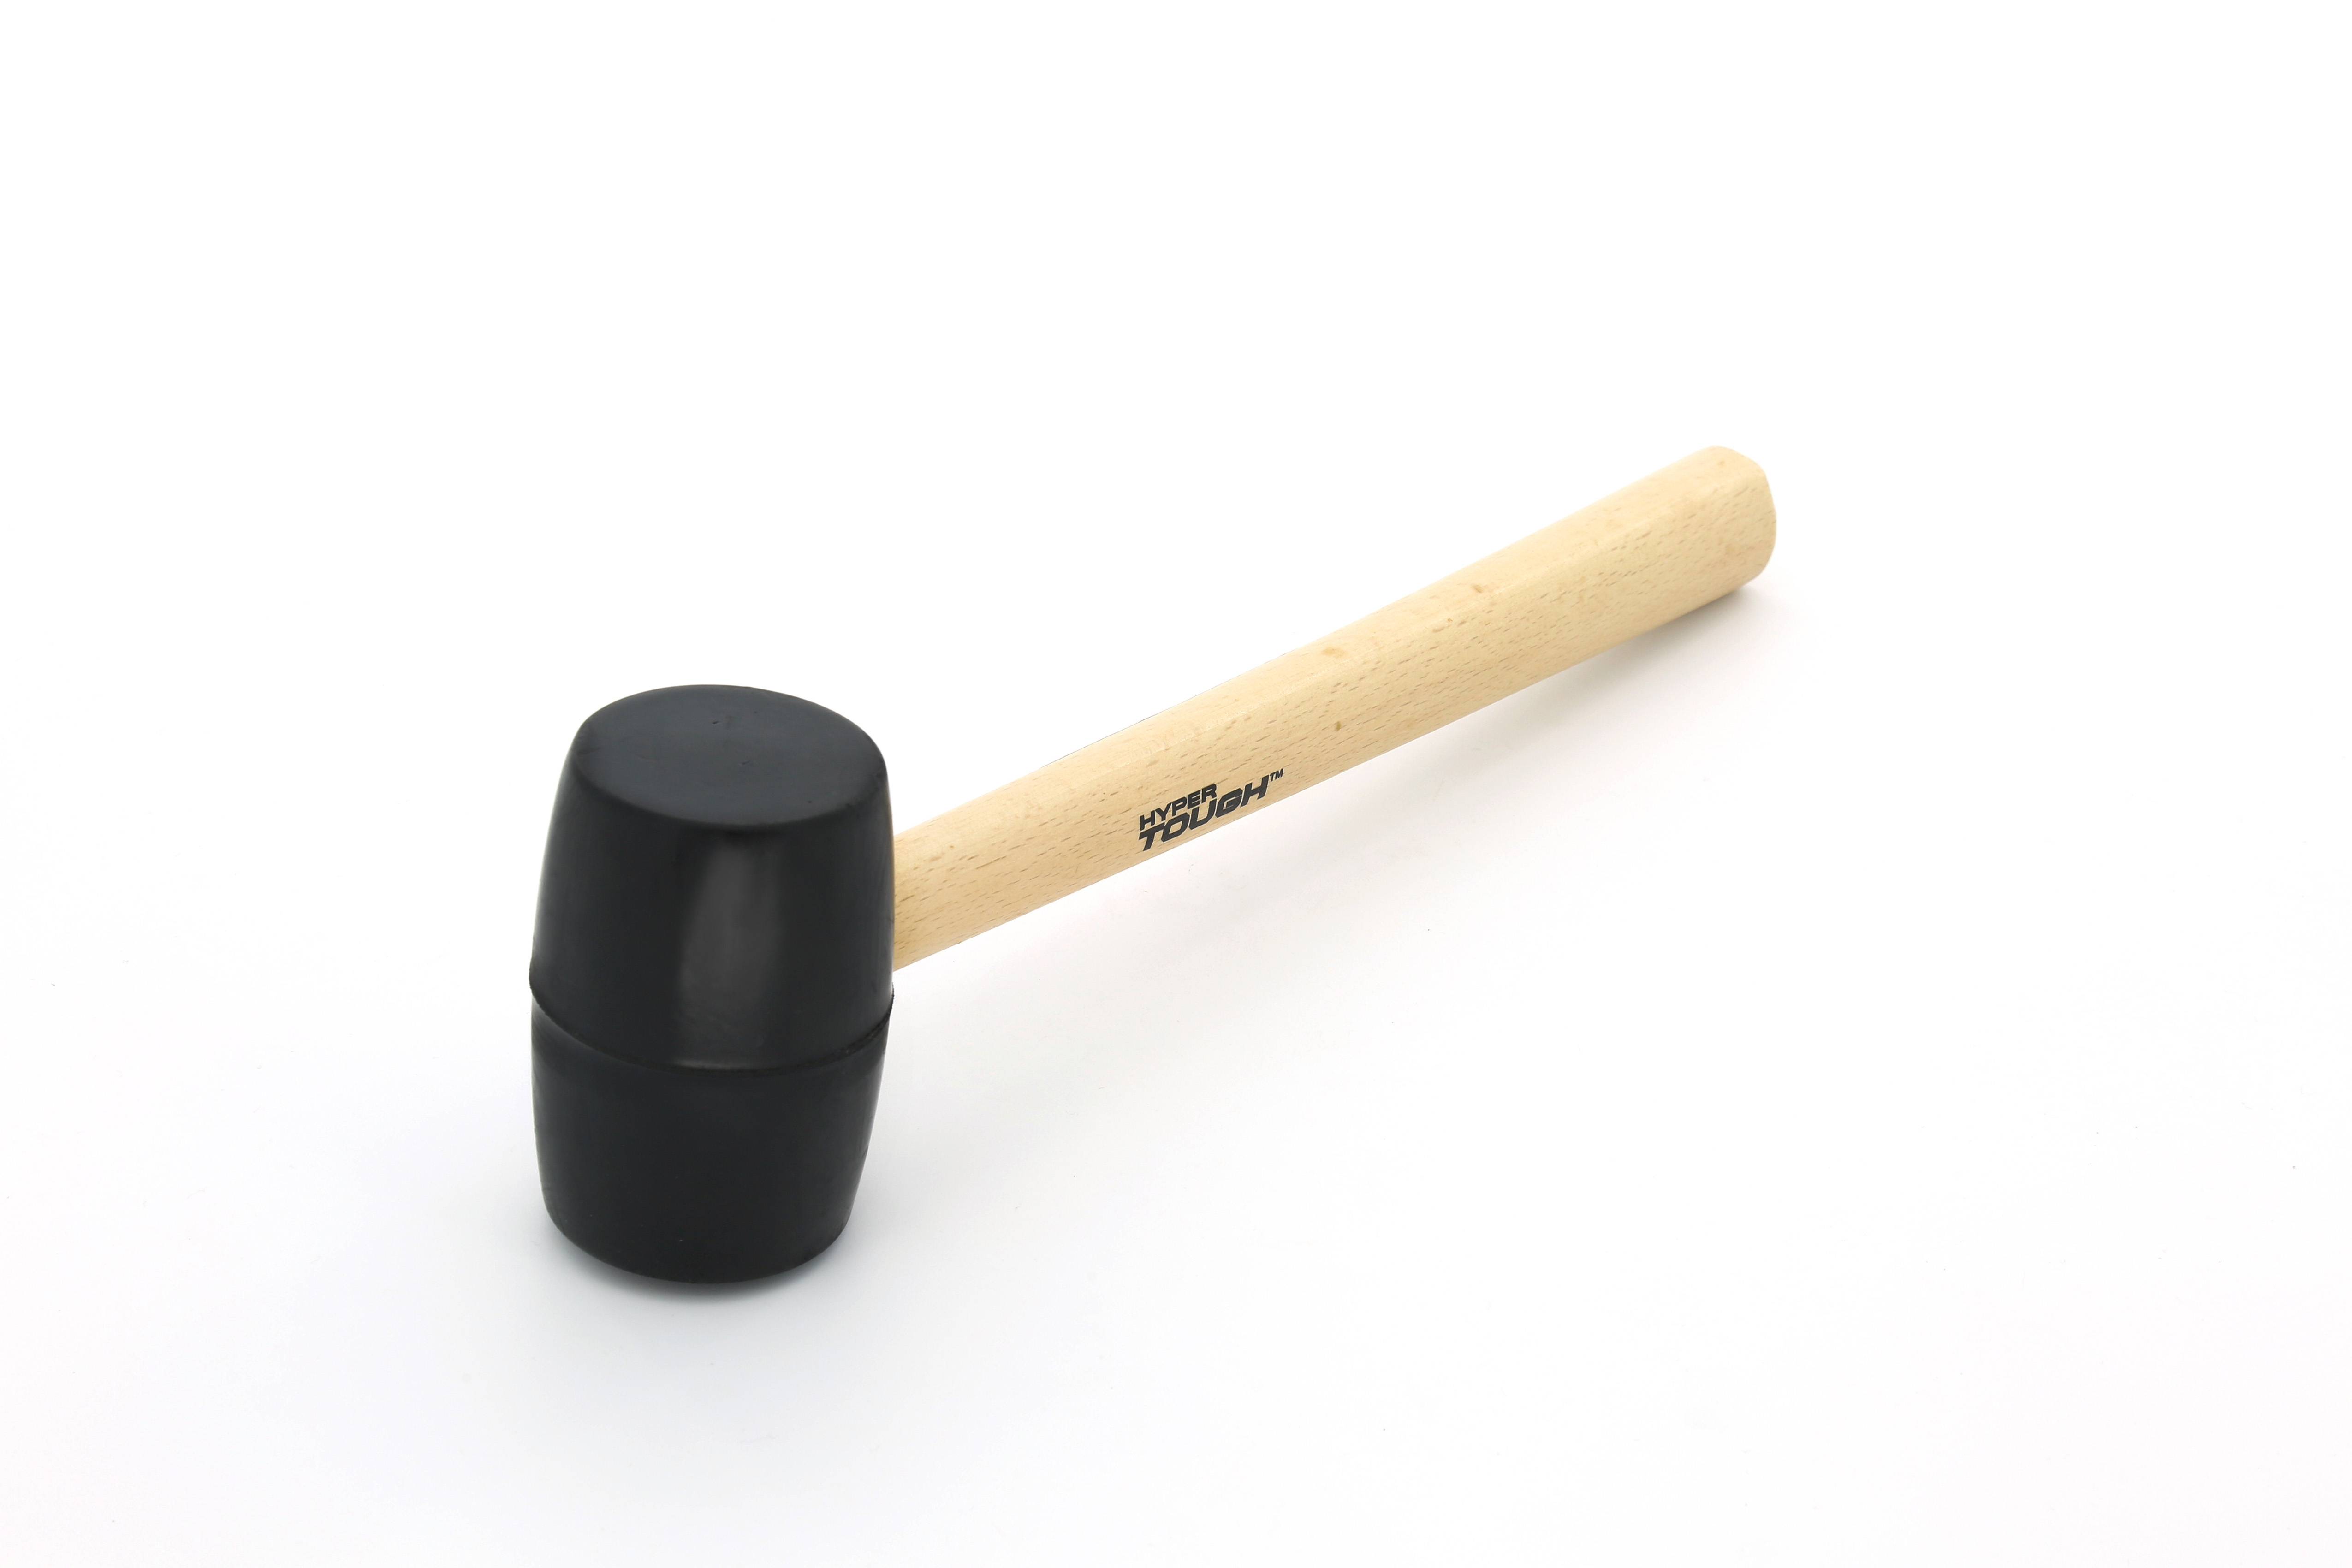 Rubber Mallet, Small